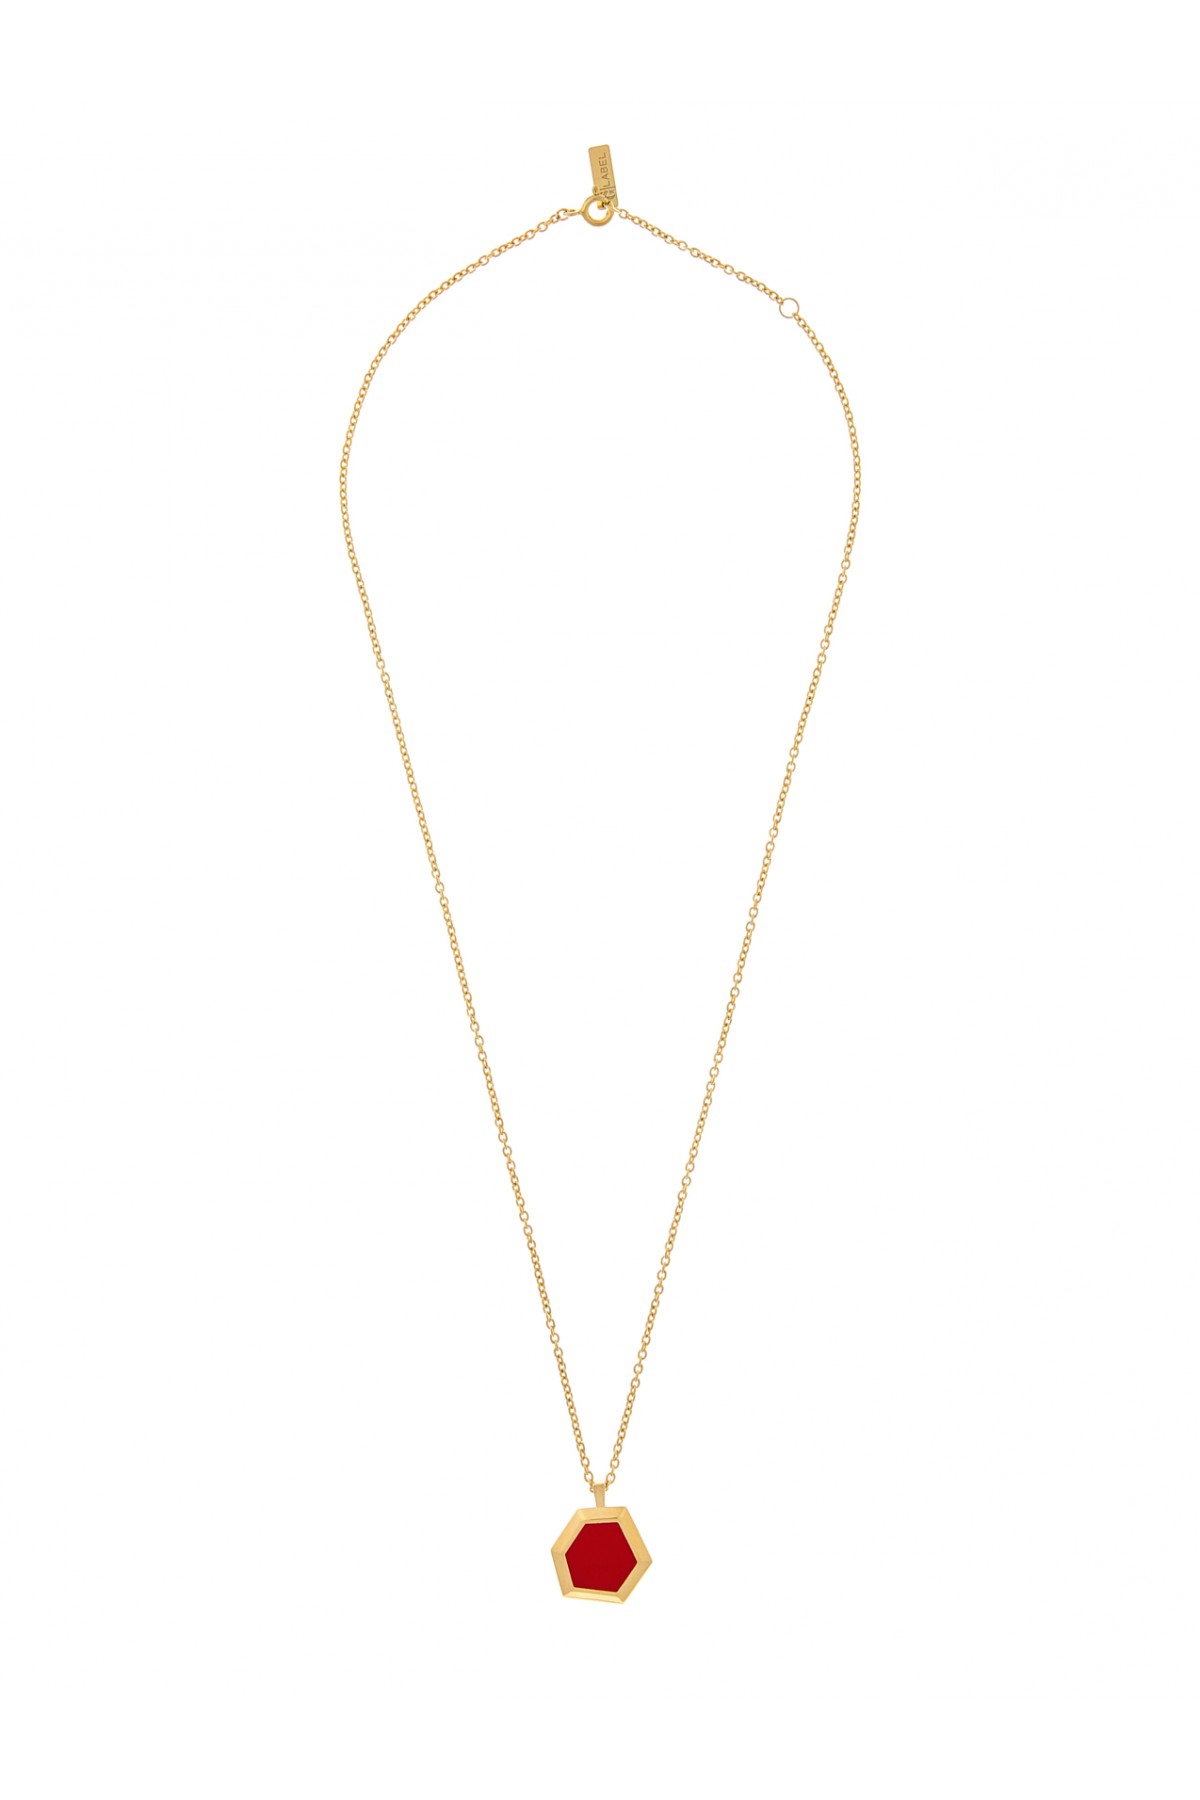 Thunberg Necklace